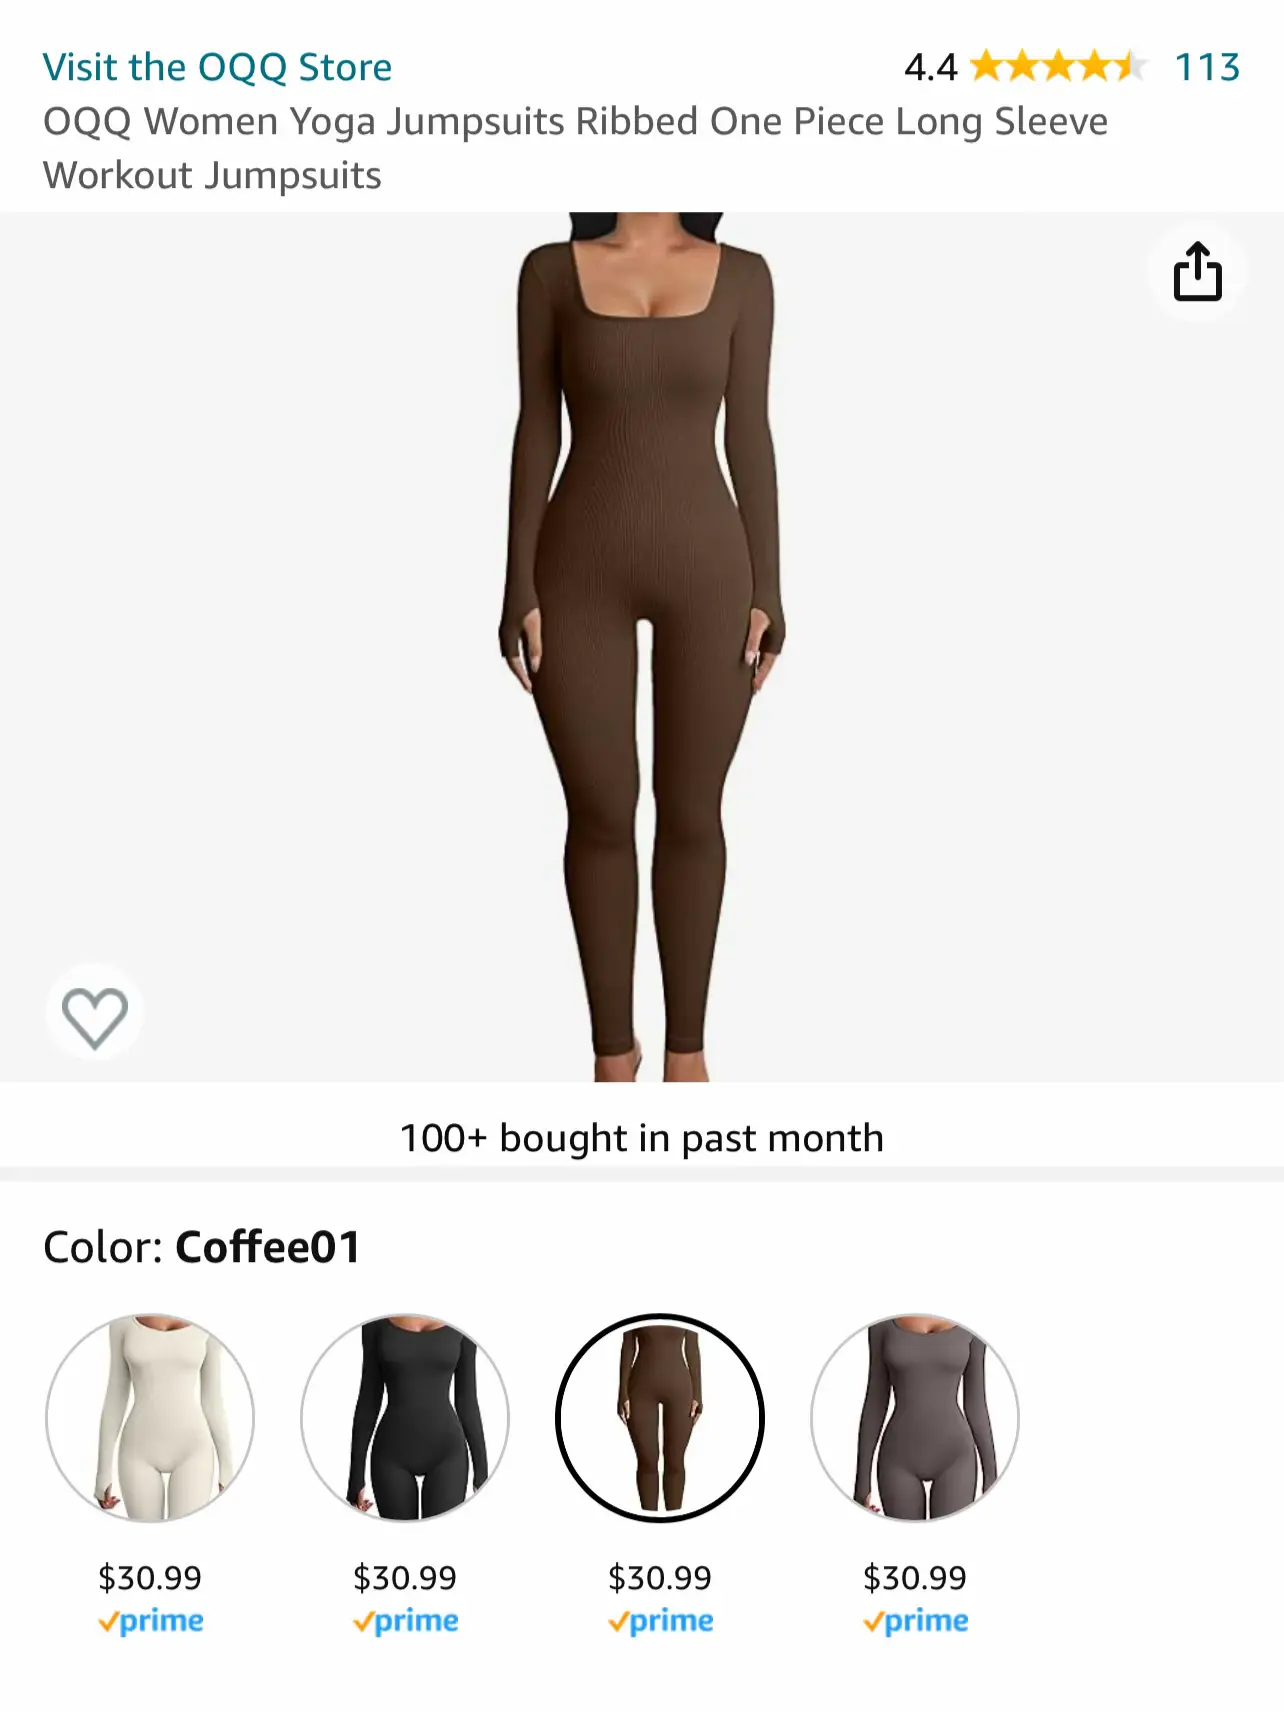 I'm loving this @pumiey.us shapewear, and all I can say is WOW.😍 I re